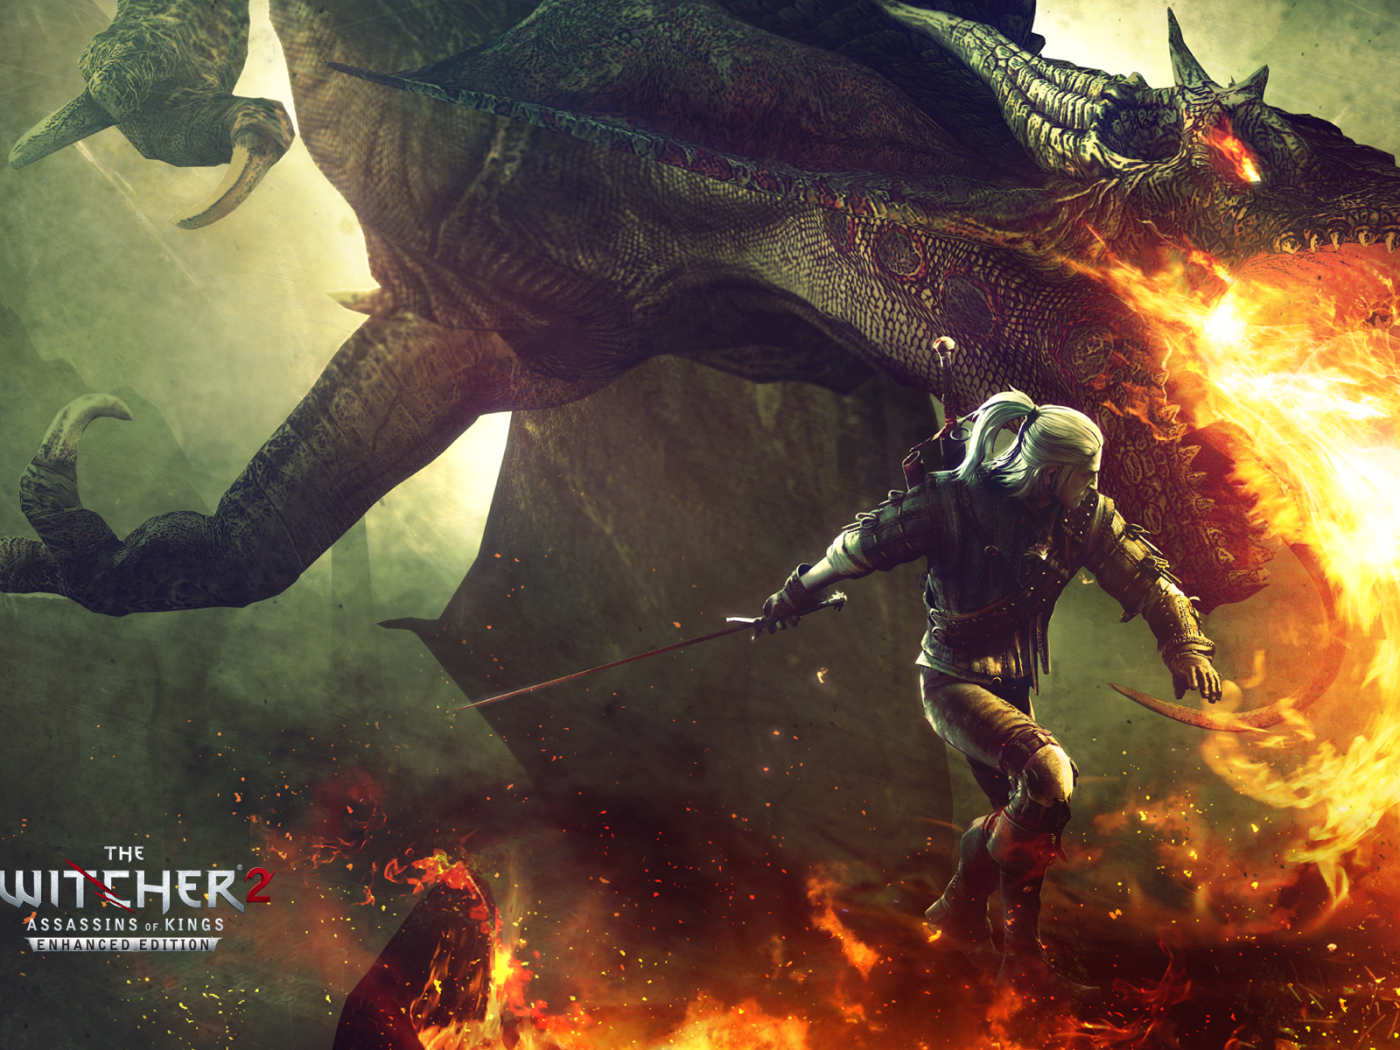 Fire-breathing monster in the game The Witcher